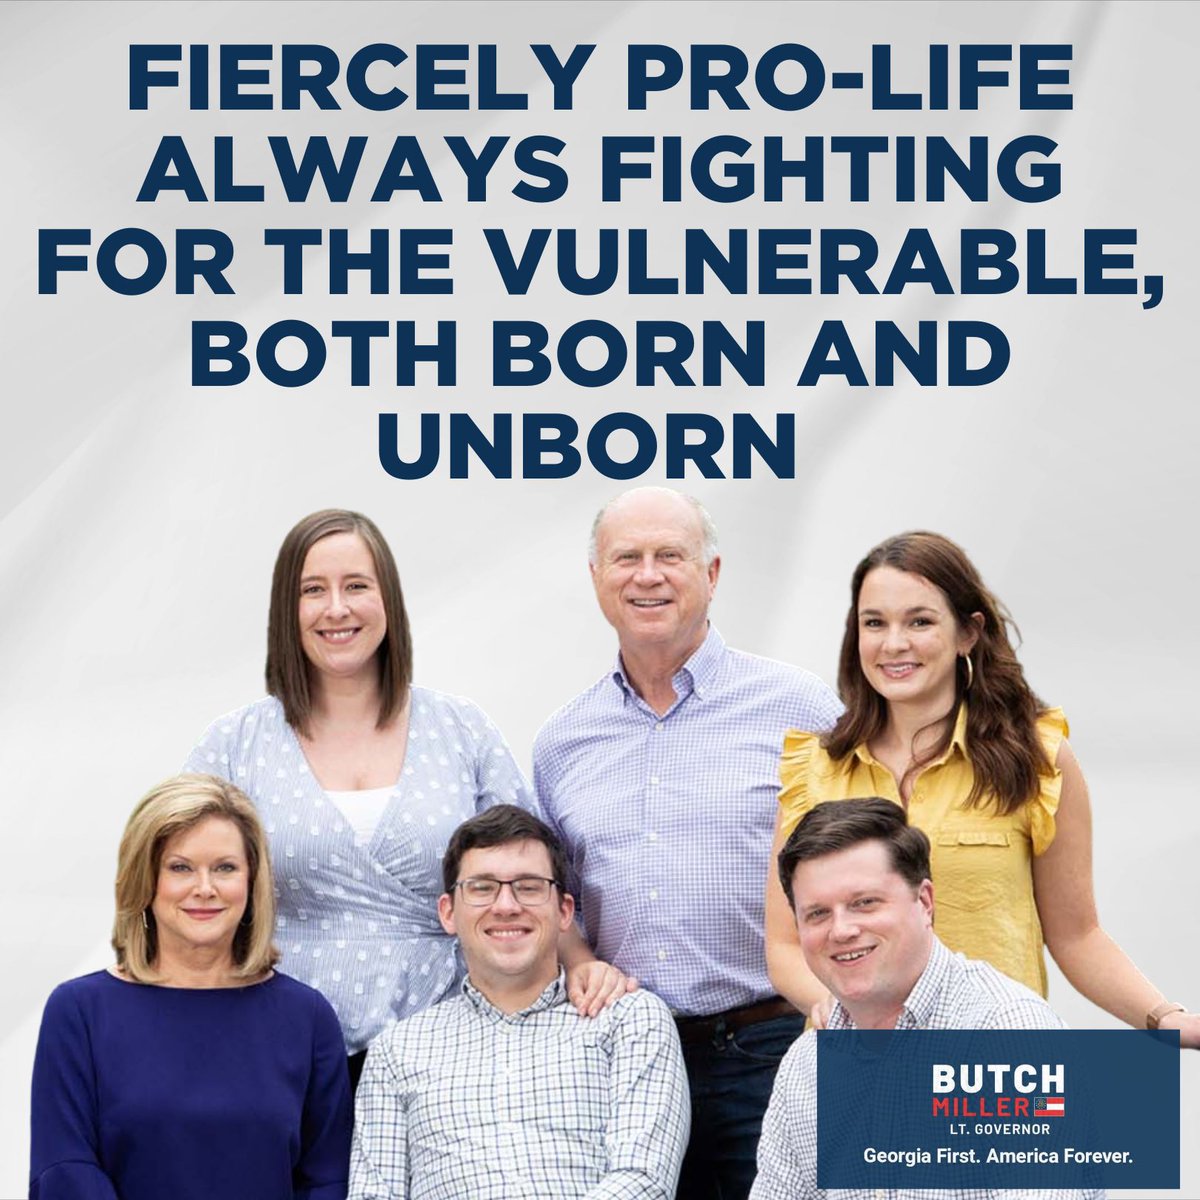 All lives are made in the image of God and are worth fighting for. This is an issue near to my heart. I’m also proud to be certified by the largest pro-life organization in the state, Georgia Life Alliance. Under my leadership as your next LG, GA will be the most pro-life state!